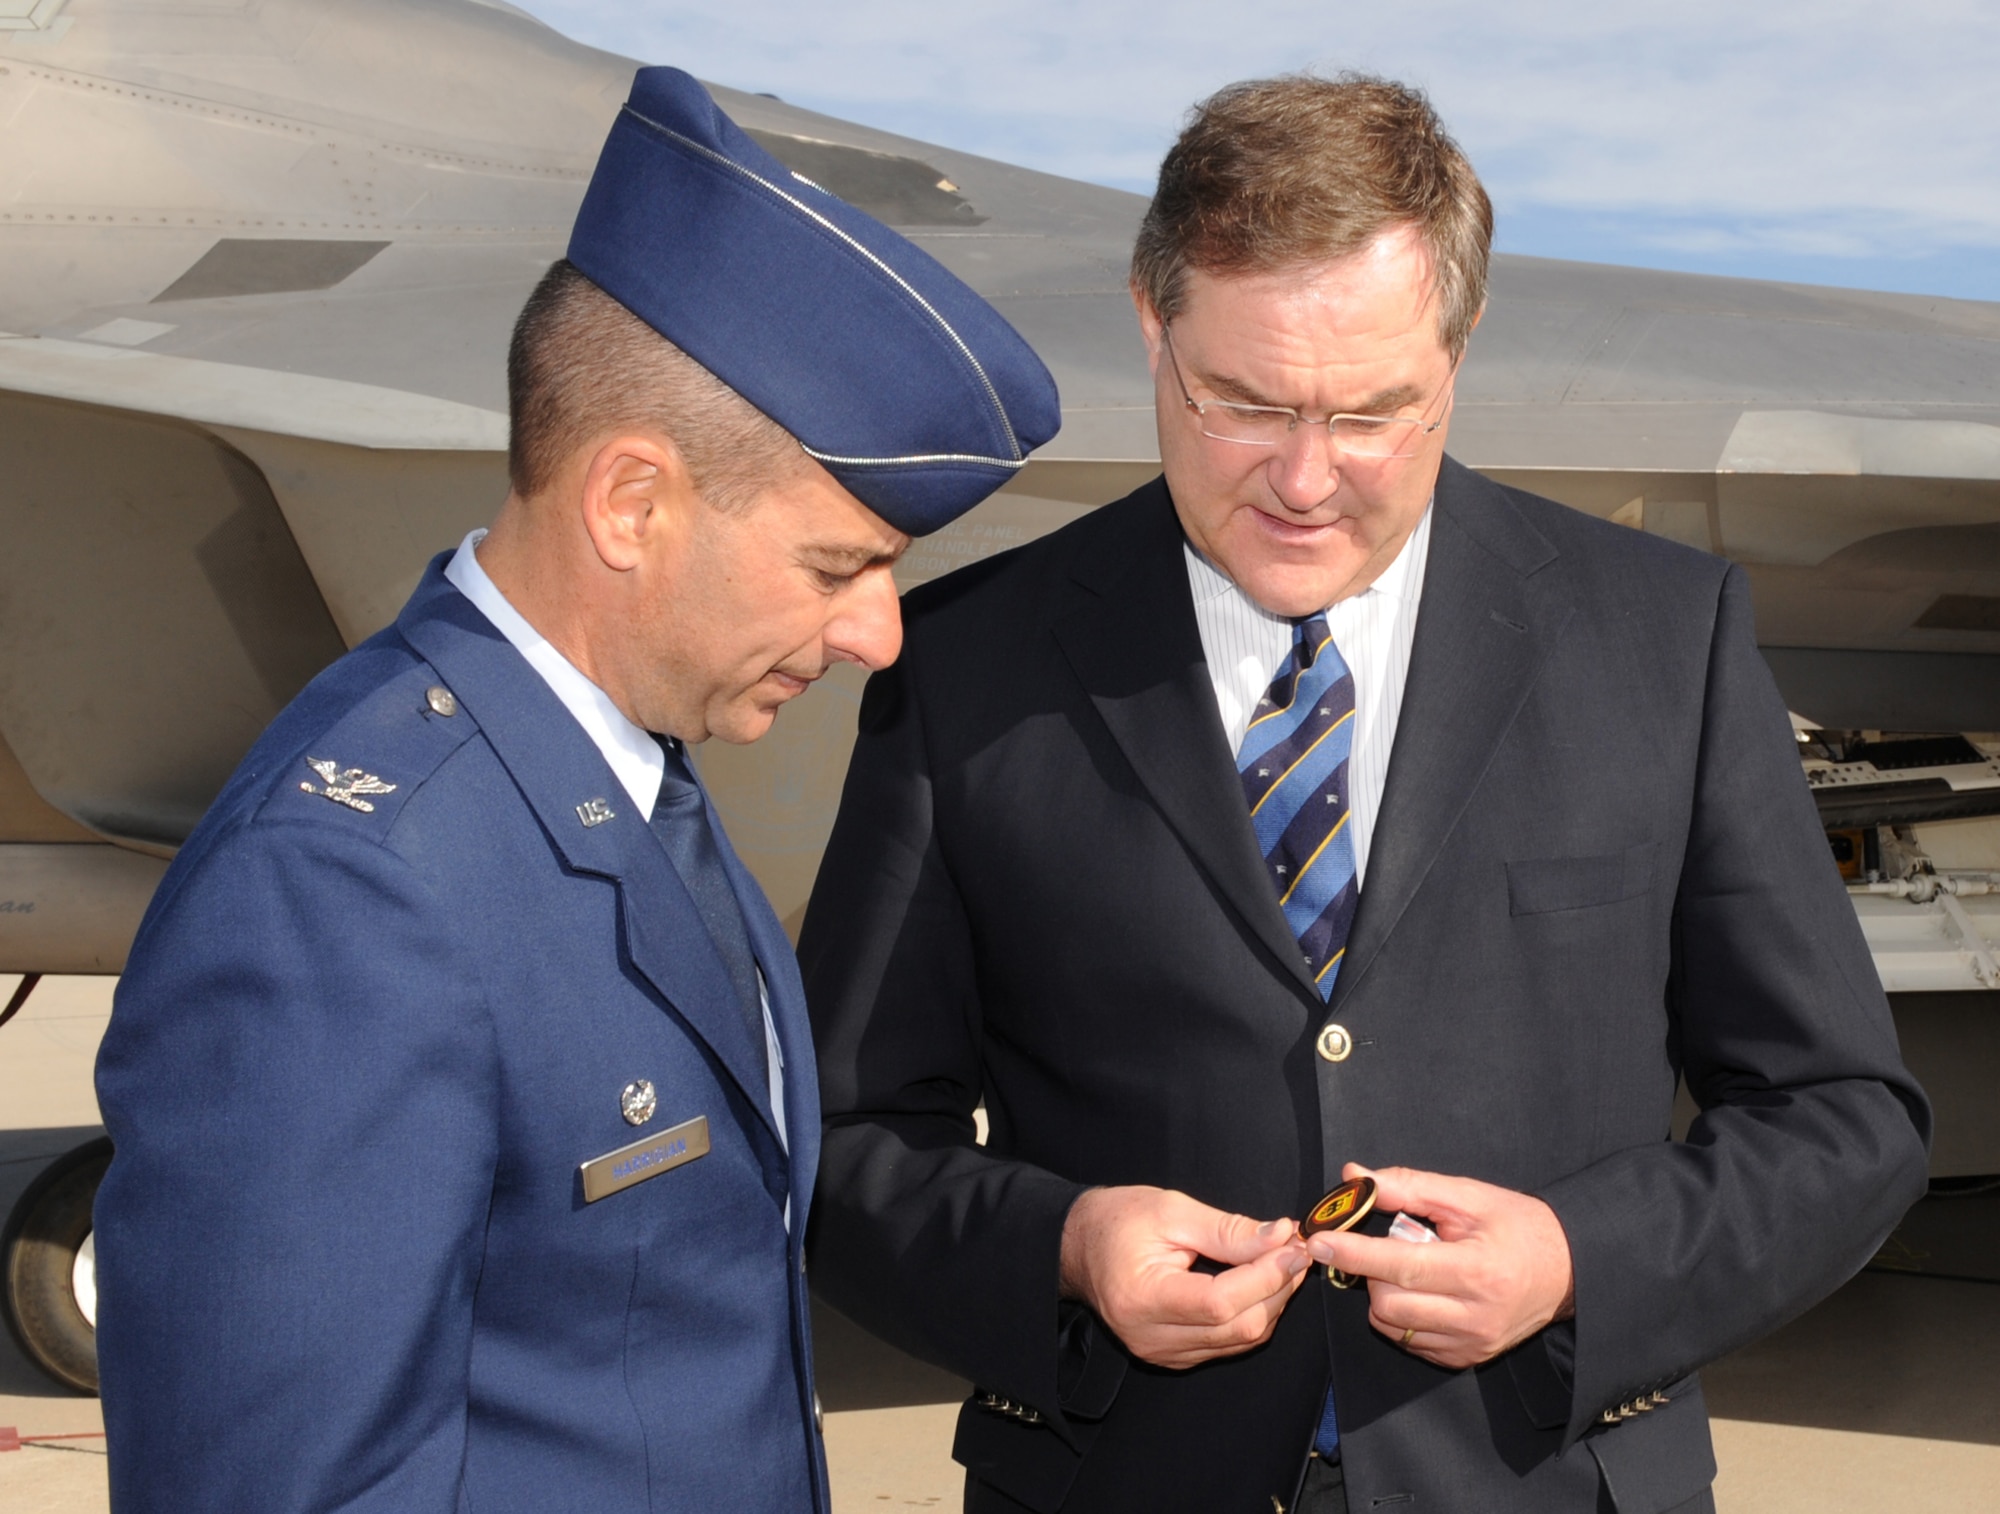 Minister Franz Josef Jung, German Minister of Defense, presents Col. Jeff Harrigian, 49th Fighter Wing commander,  a coin at Holloman Air Force Base, N.M., Nov. 24. Minister Jung came to visit Holloman to see the German Air Force Flying Training Center. The German air force has been training its aircrews throughout the United States since 1958 before it was moved to Holloman in 1992. (U.S. Air Force photo/Airman 1st Class Michael Means)